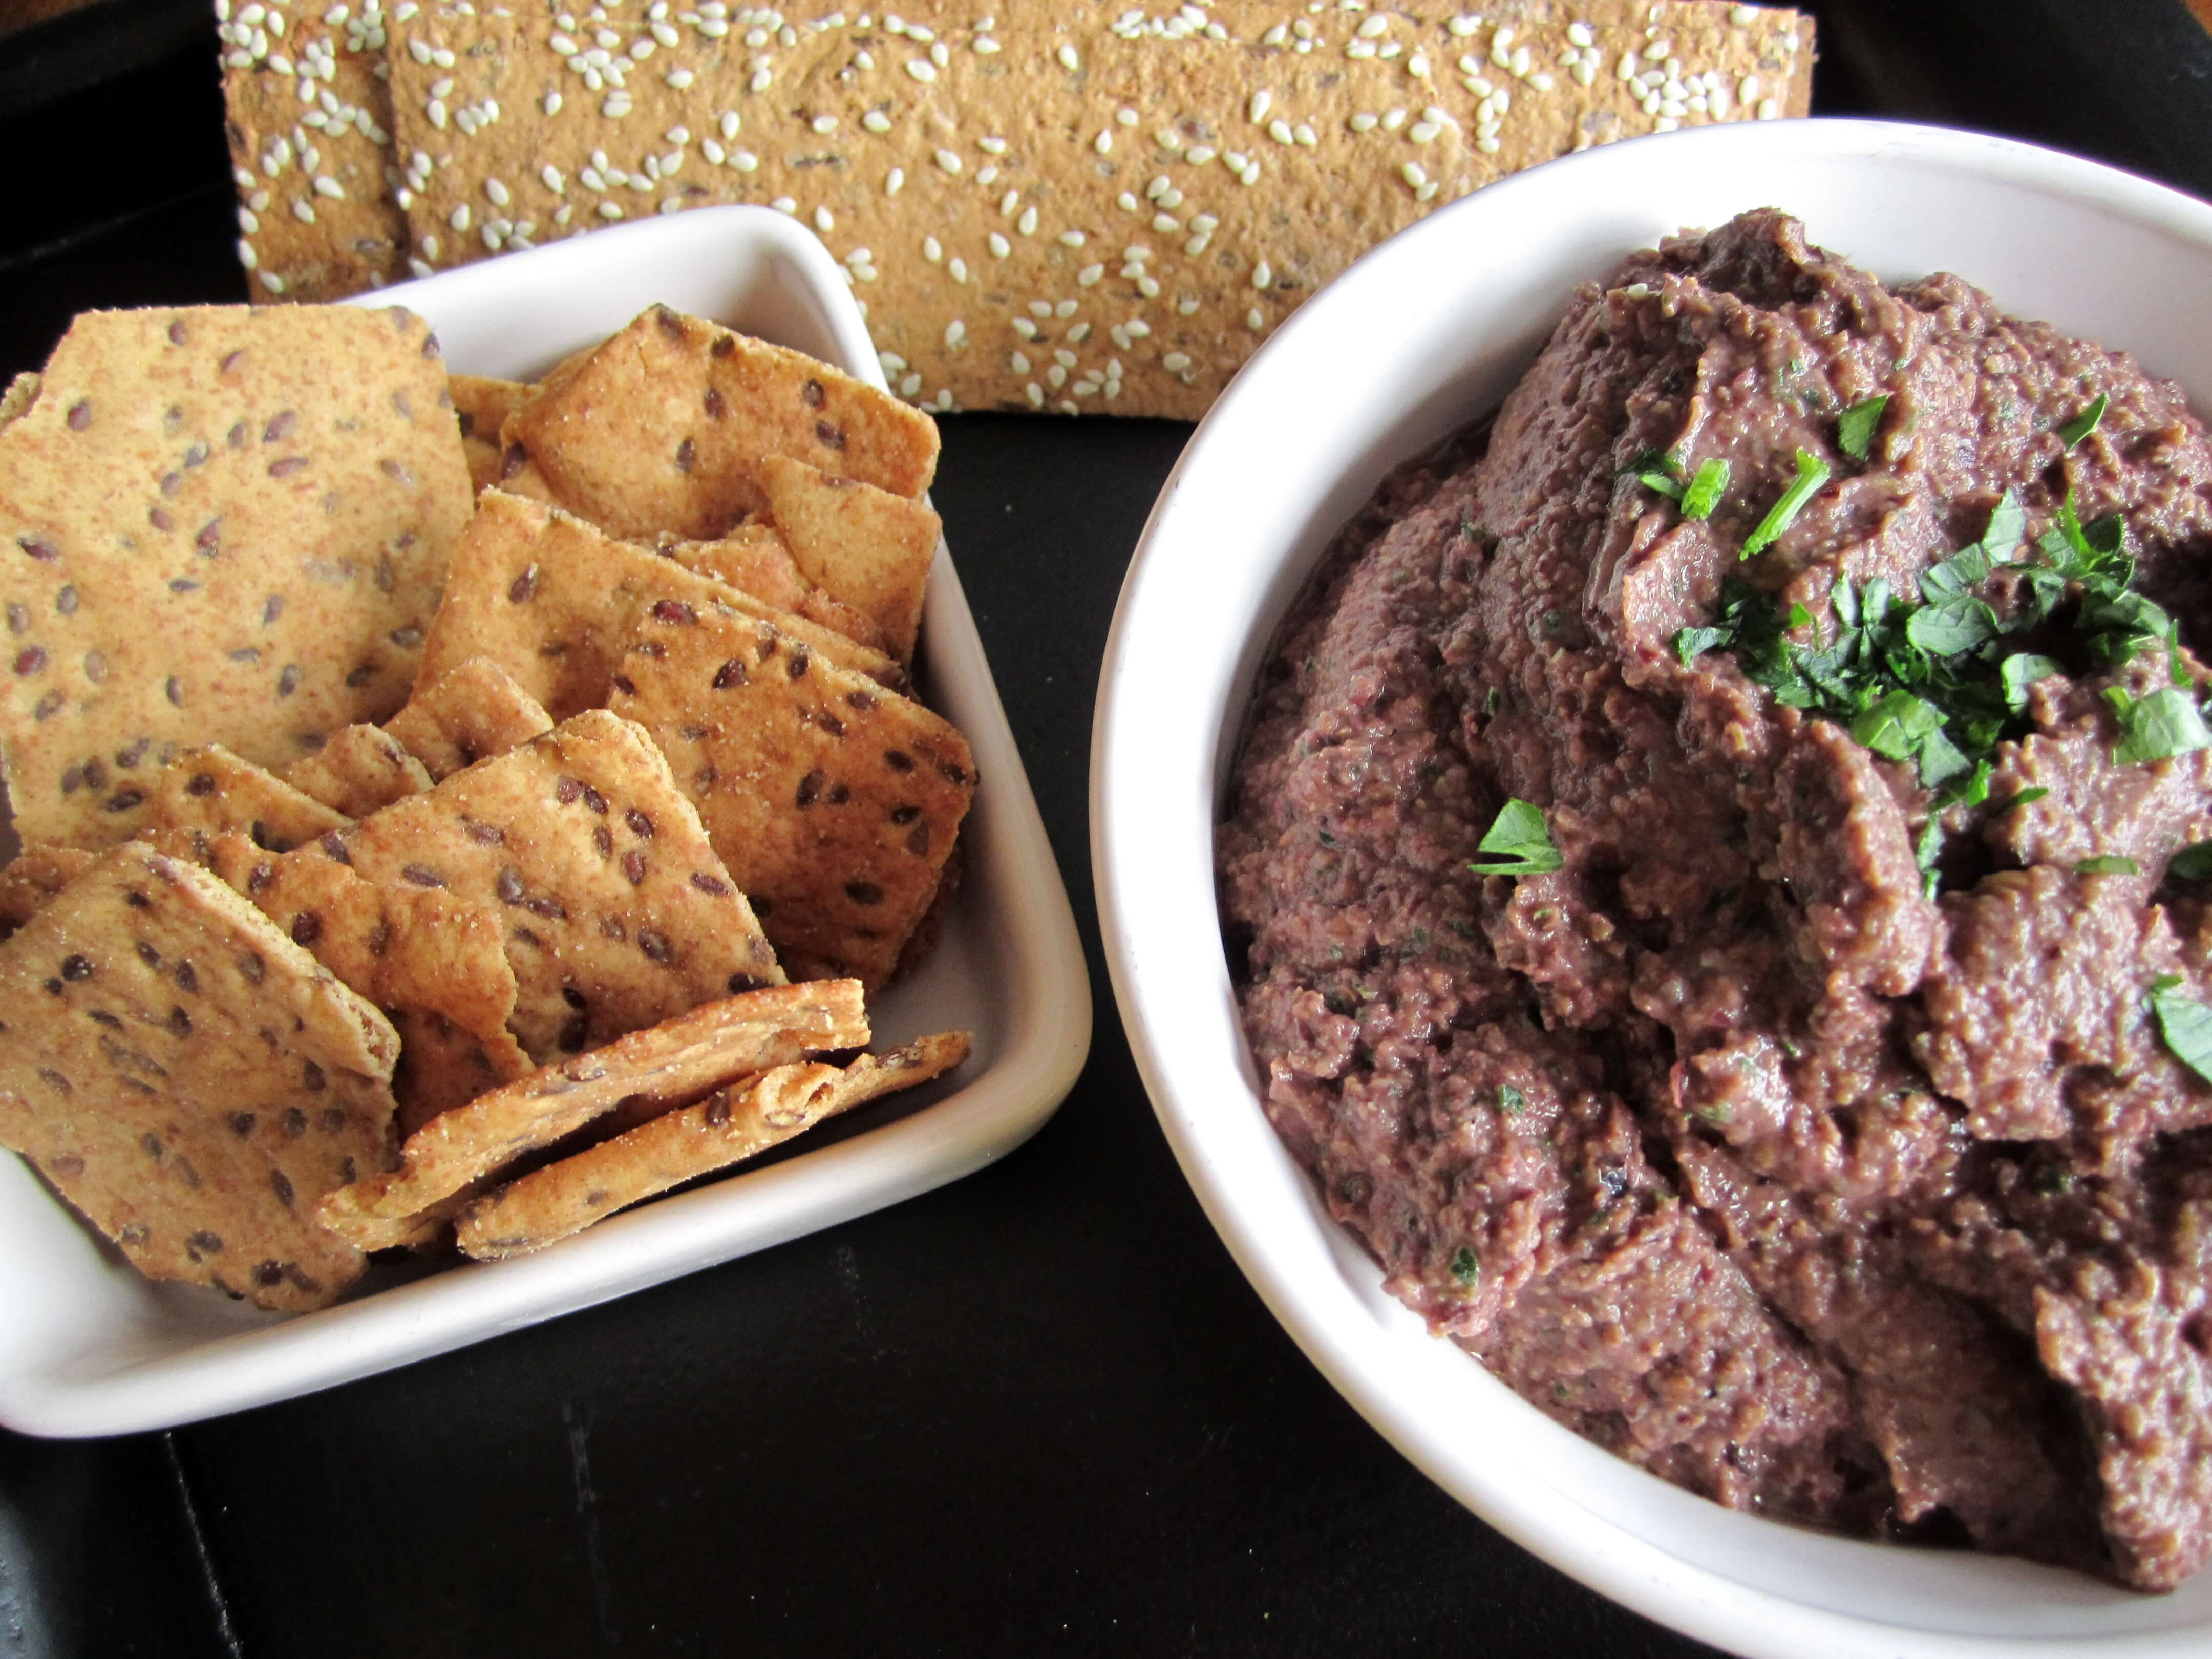 olive and lentil tapenda with crackers for dipping